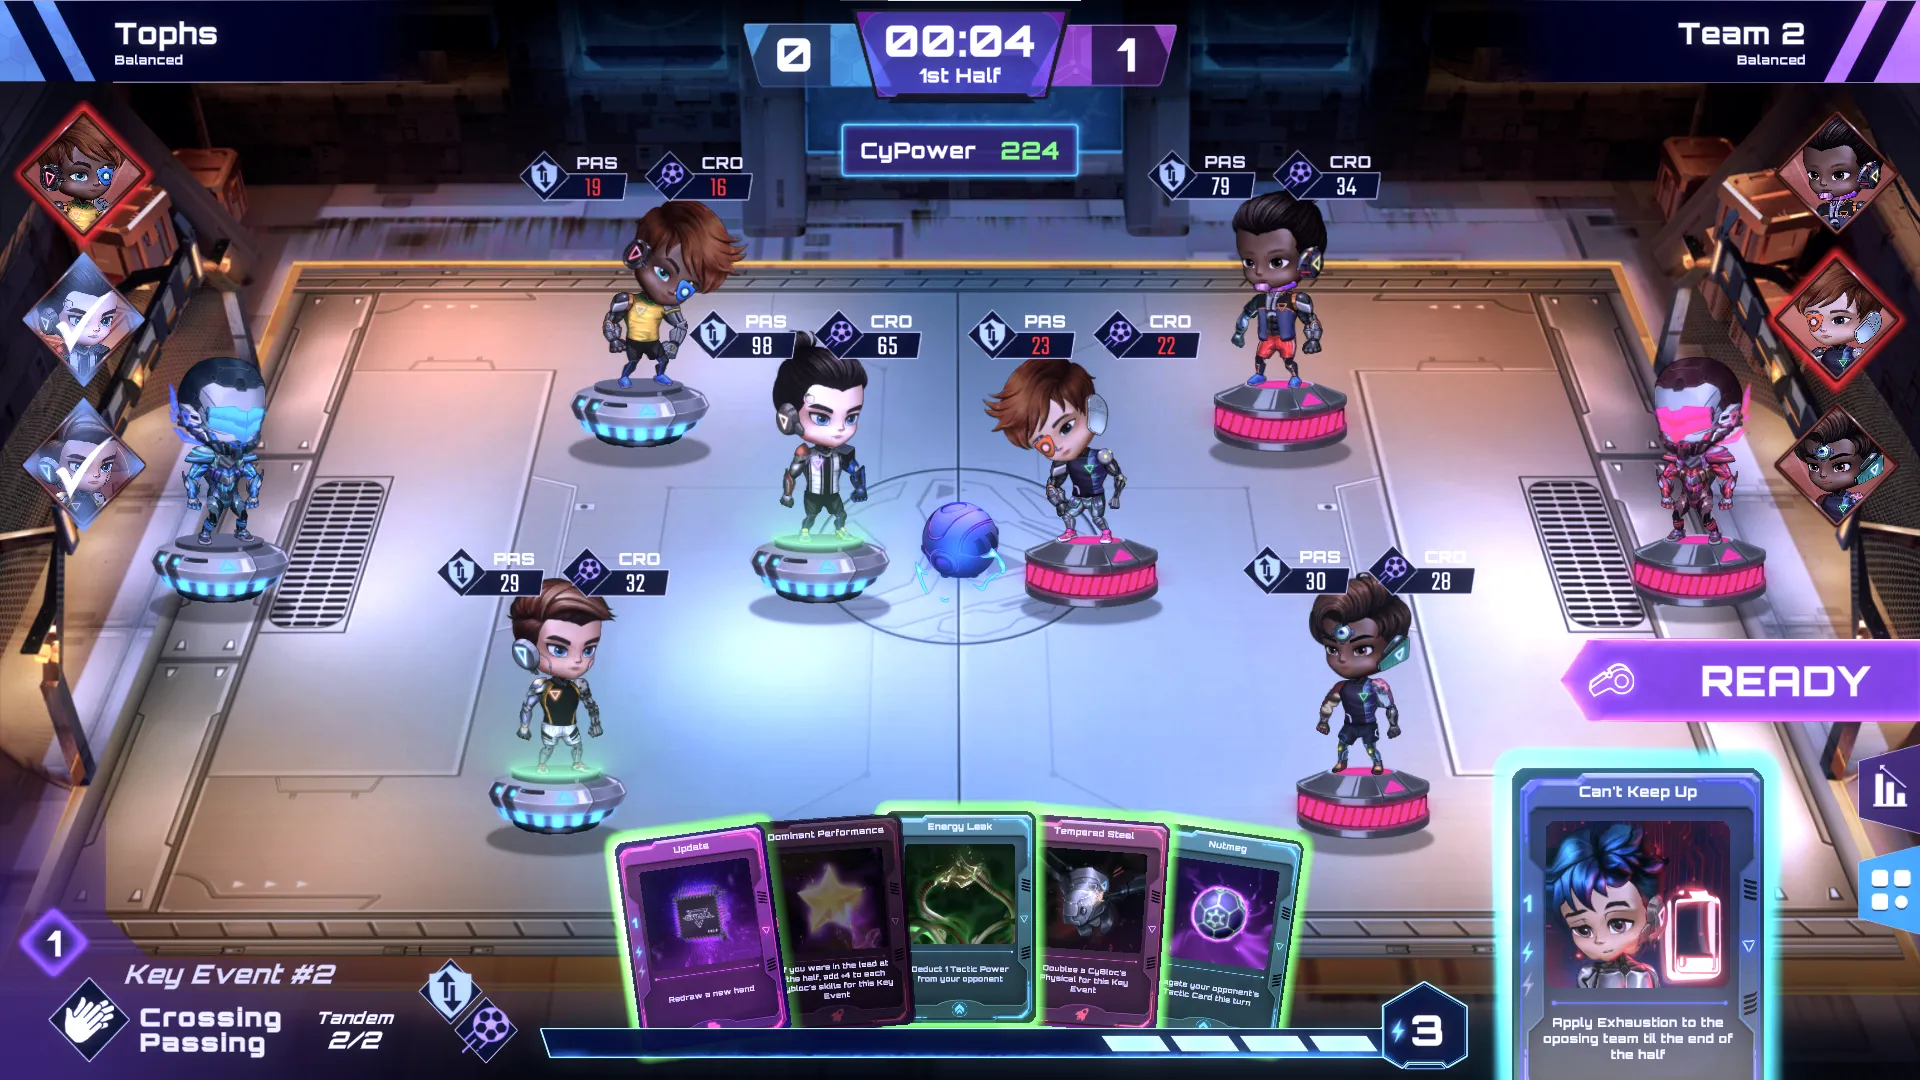 The picture displays the CyBall Battle Interface, where two players compete against each other using their CybBocs to battle it ou in the arena.